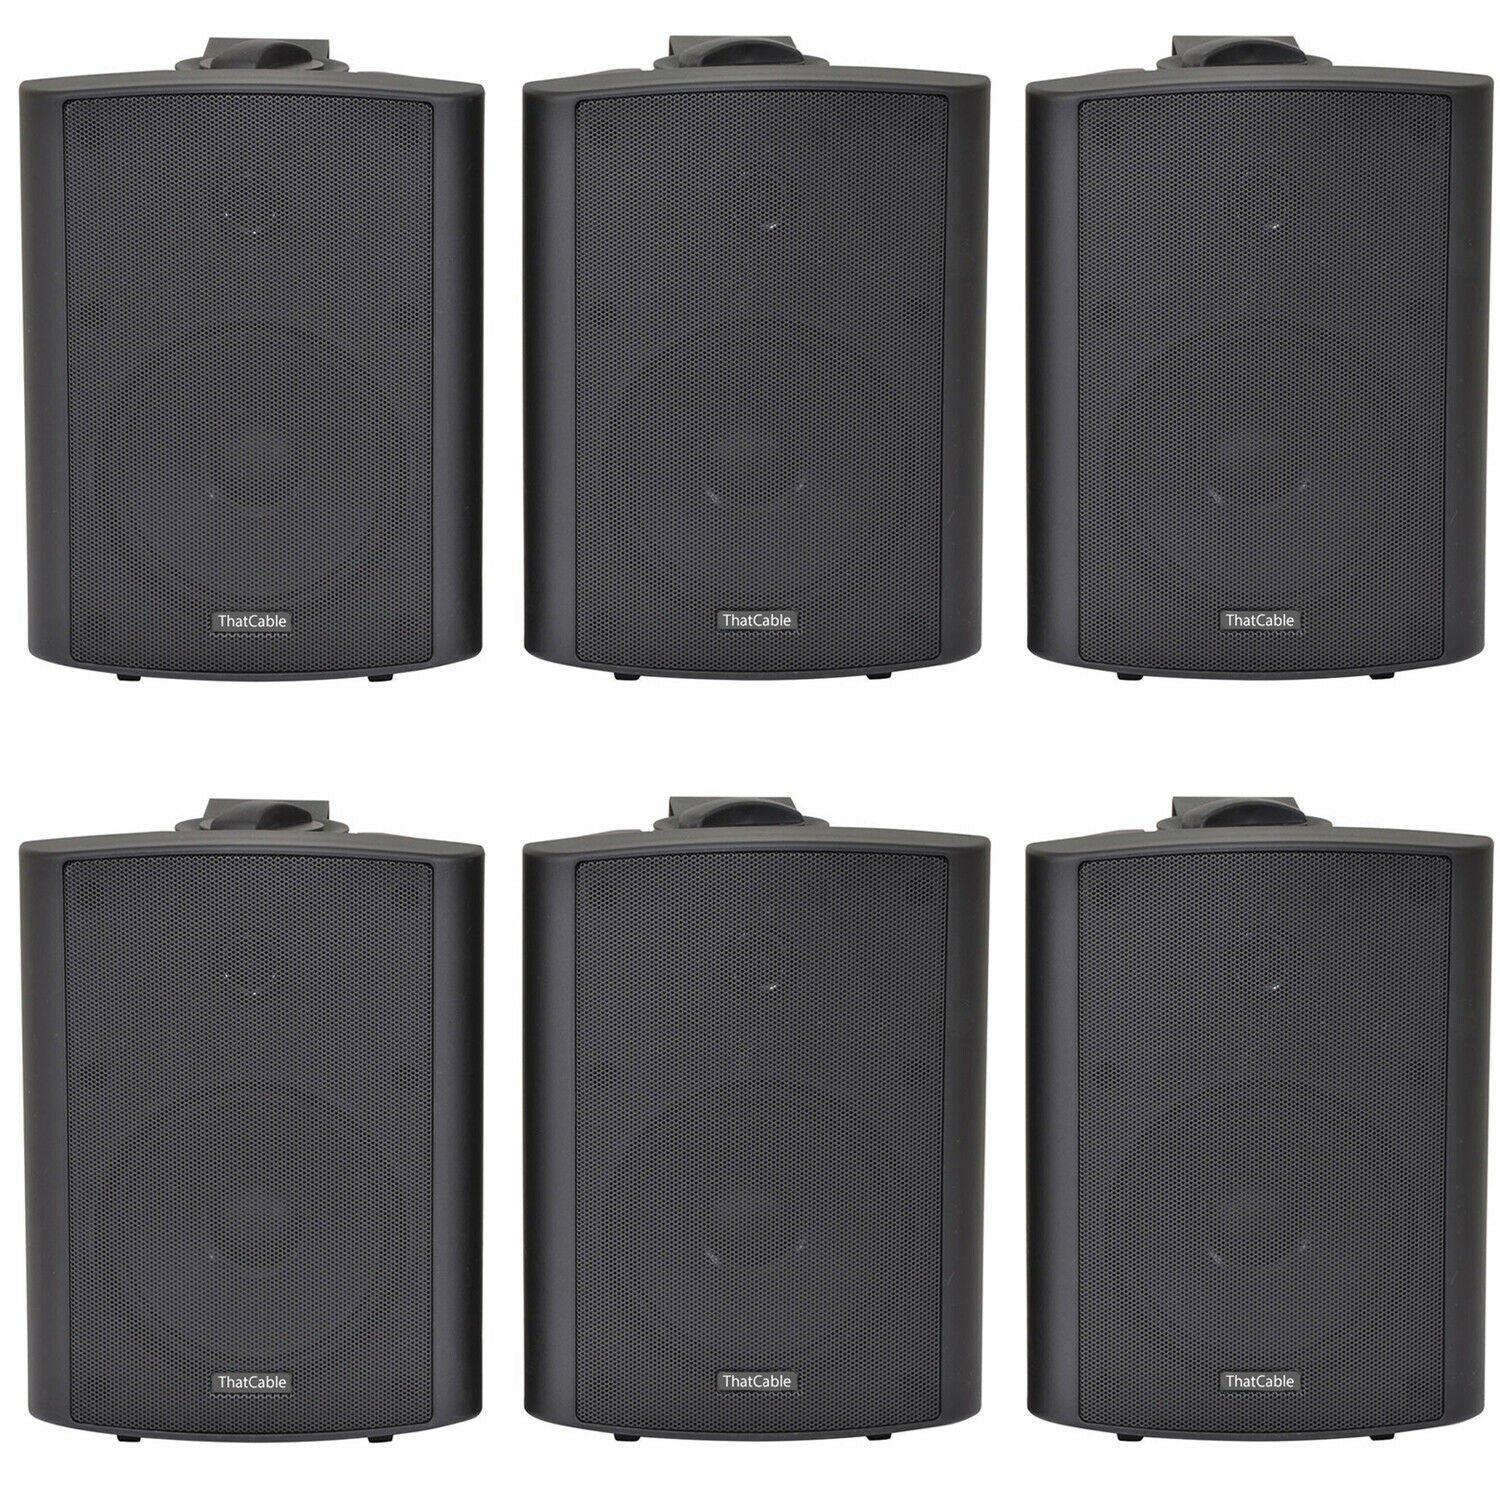 6x 120W Black Wall Mounted Stereo Speakers 6.5